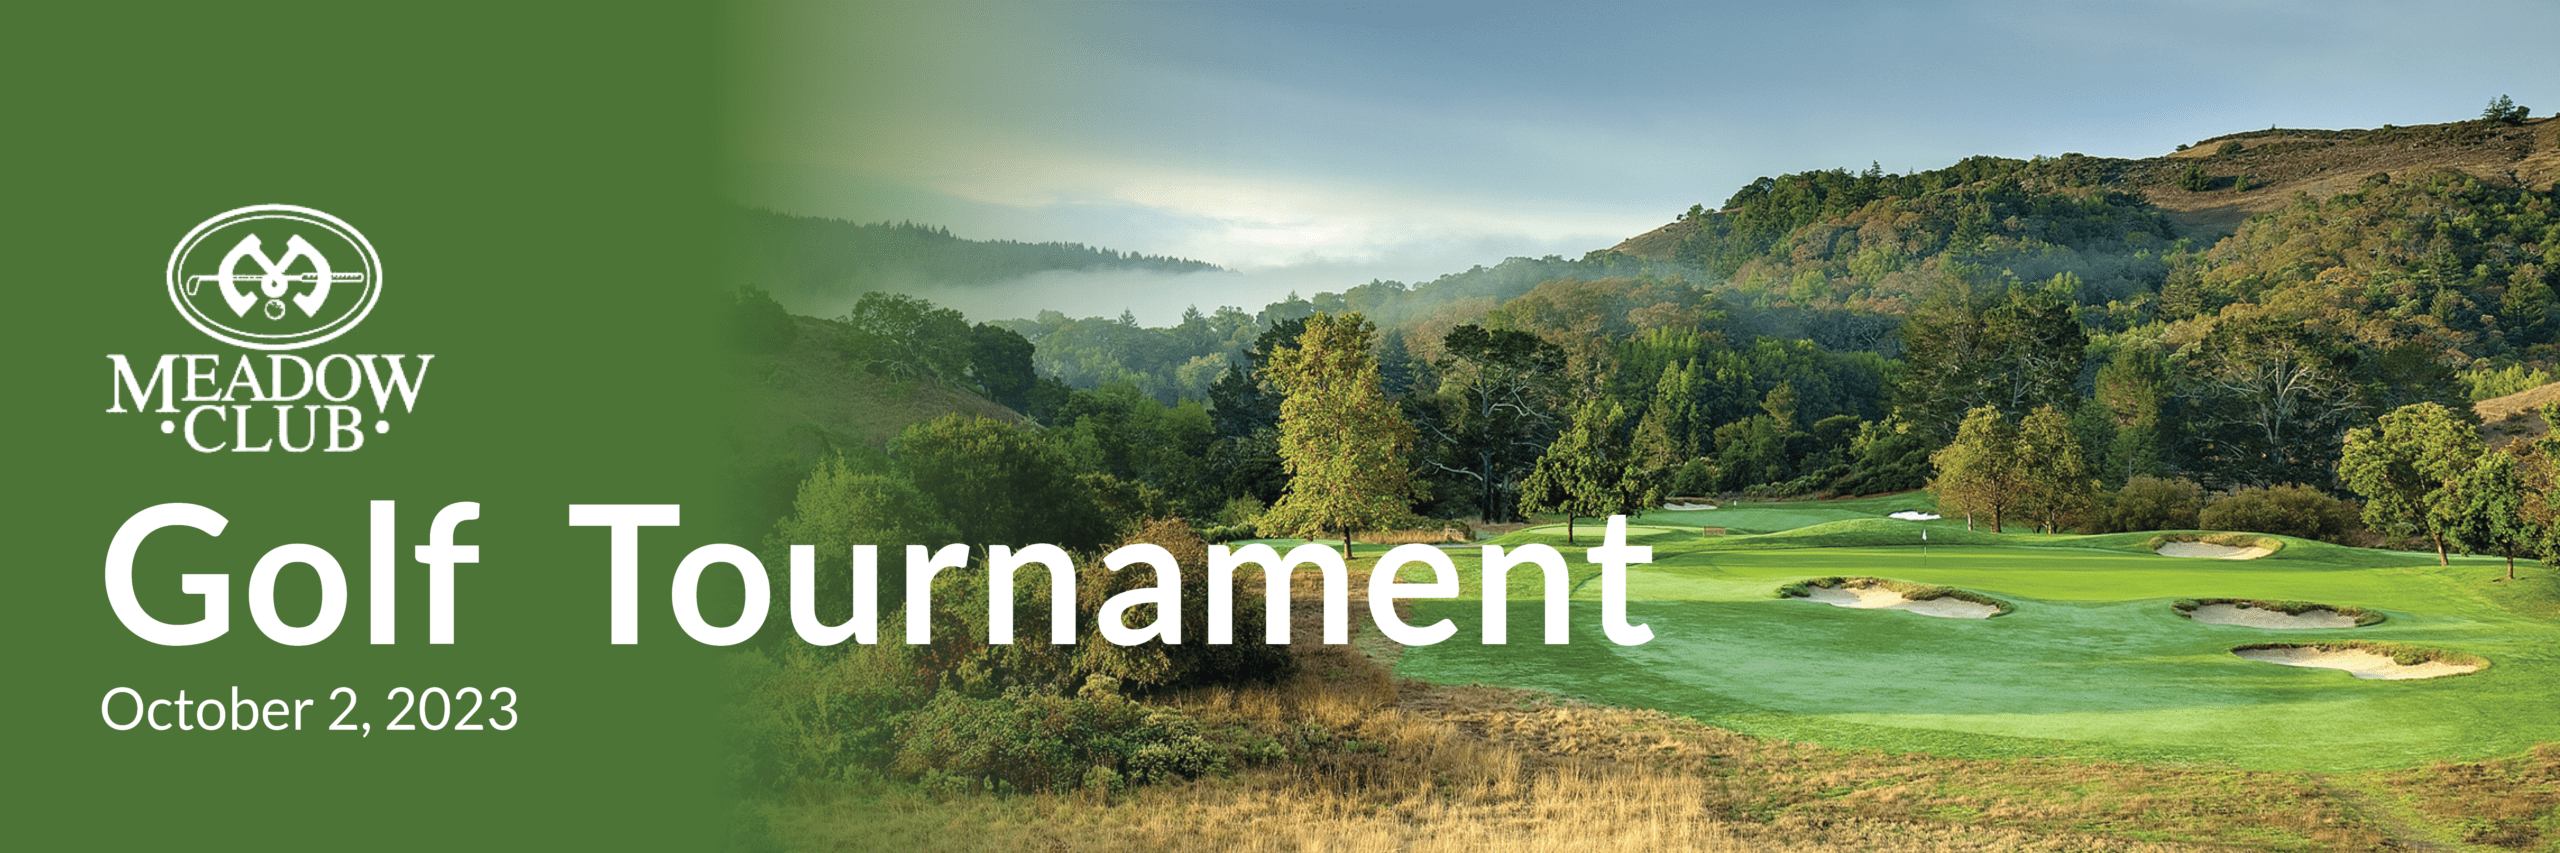 $5,000 Putting Contest, Tournament Gifts